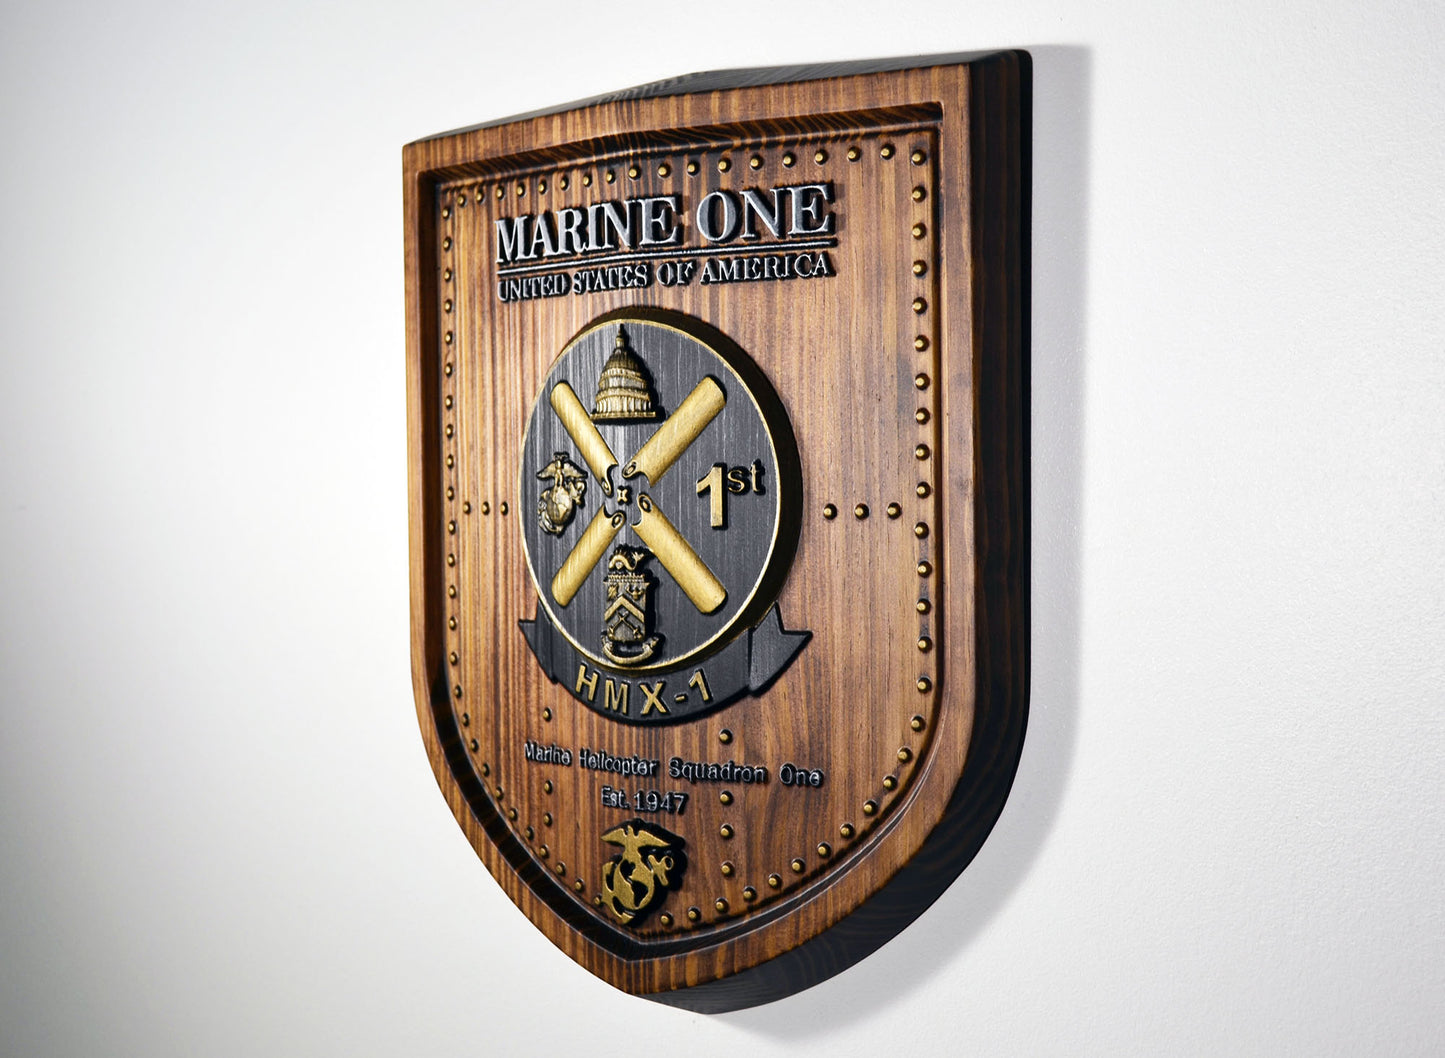 USMC HMX-1, Marine Helicopter Squadron One, 3d wood carving, military painted plaque